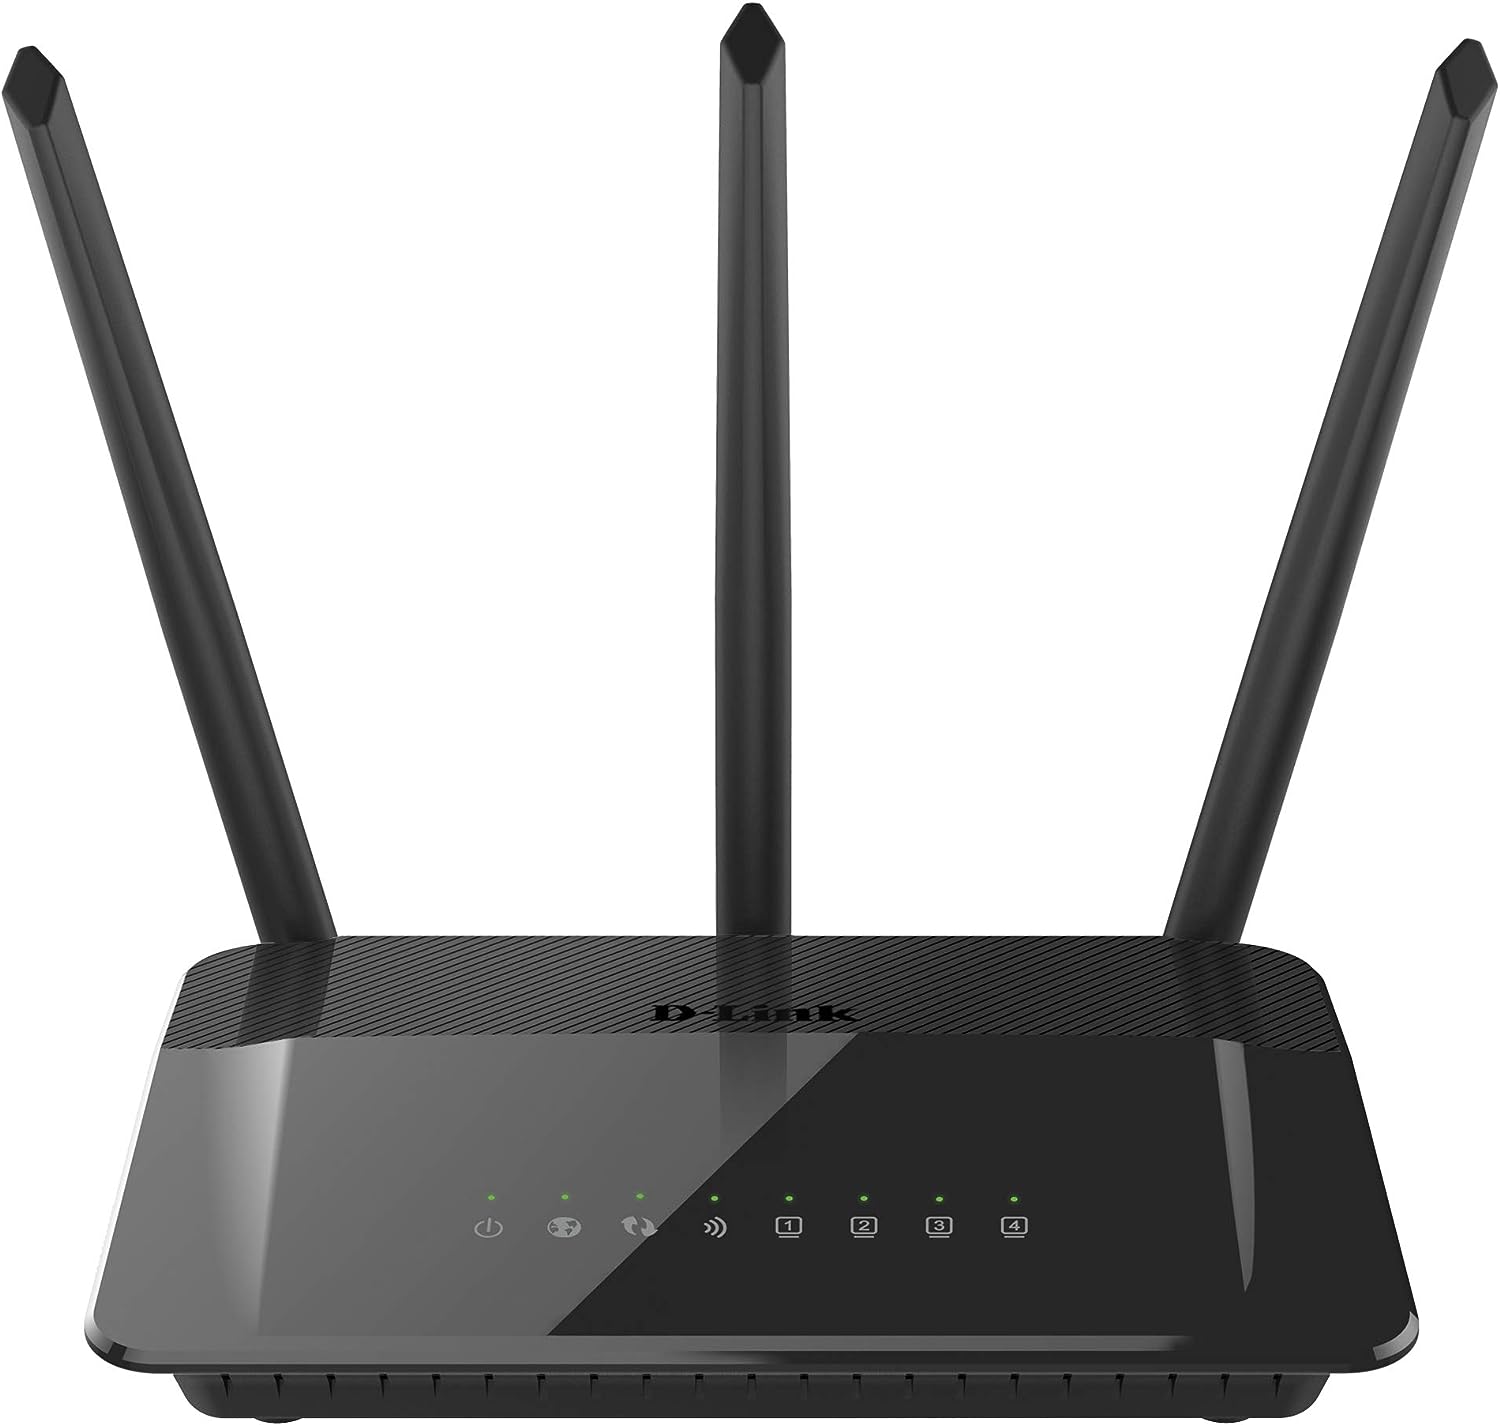 Router D-Link Wireless AC1750 Dual Band Gigabit